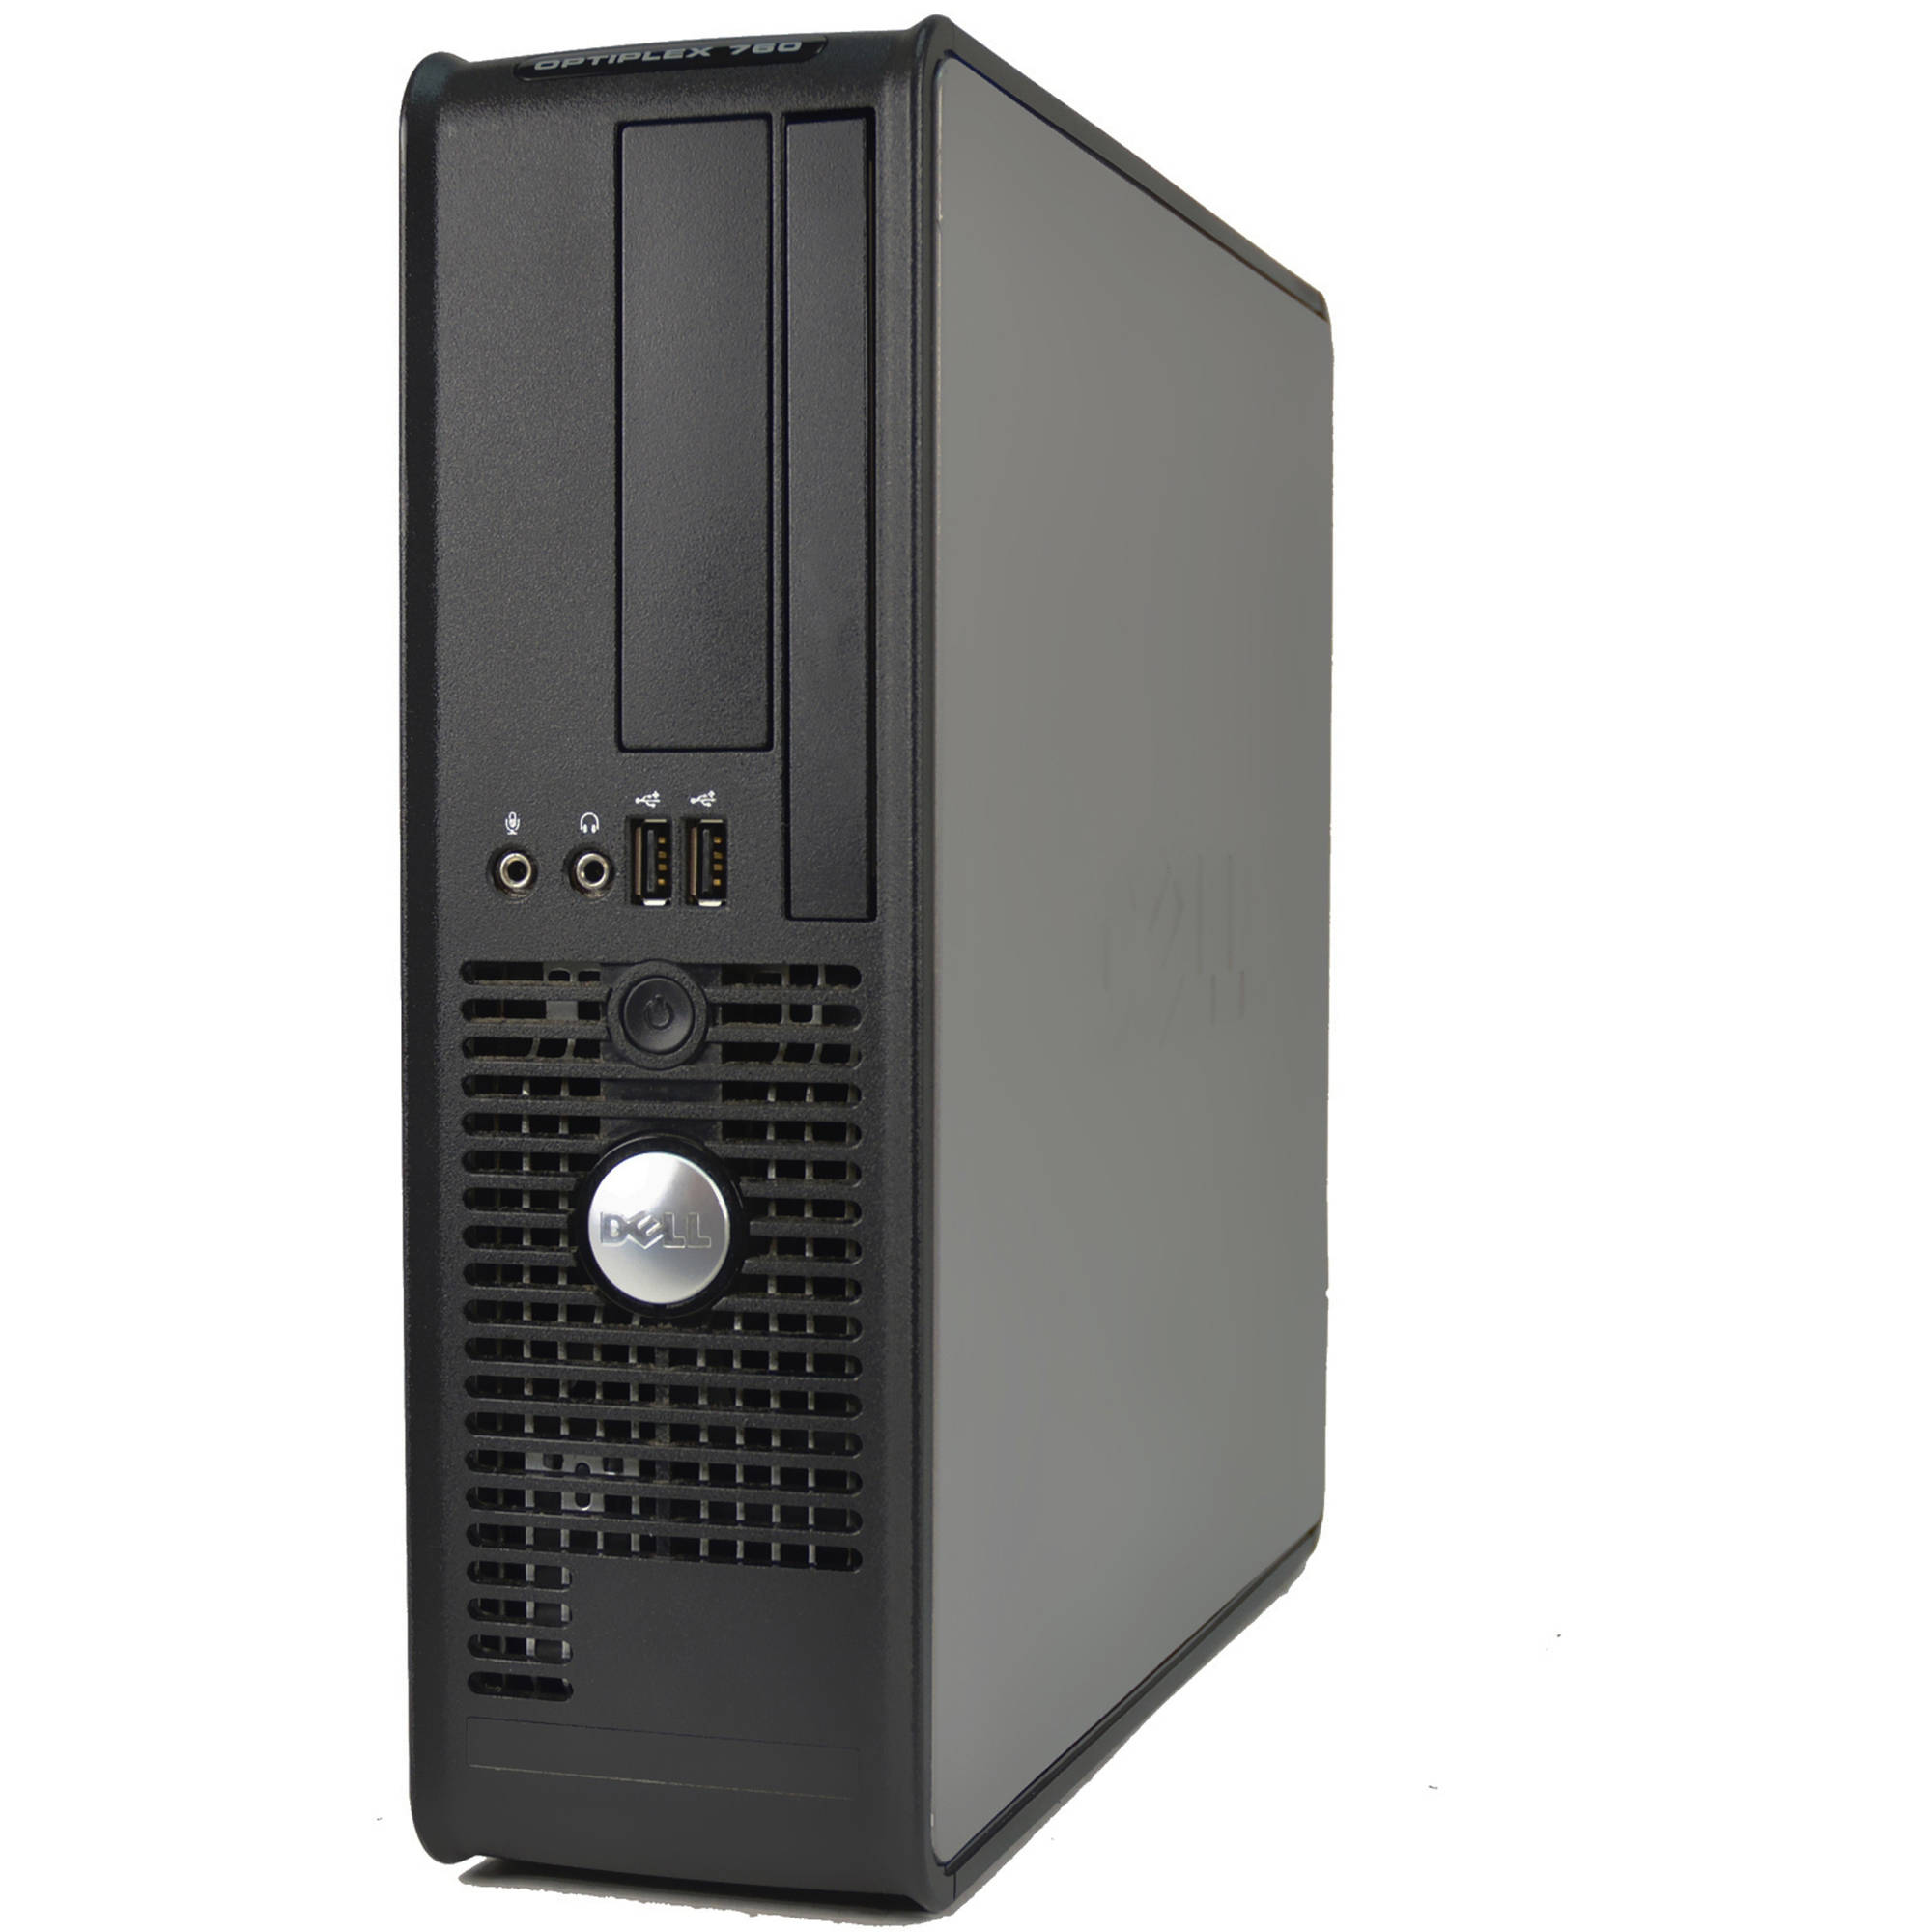 Restored Dell Black 760 Desktop PC with Intel Core 2 Duo Prcessor, 4GB Memory, 1TB Hard Drive and Windows 10 Pro (Monitor Not Included) (Refurbished) - image 3 of 5